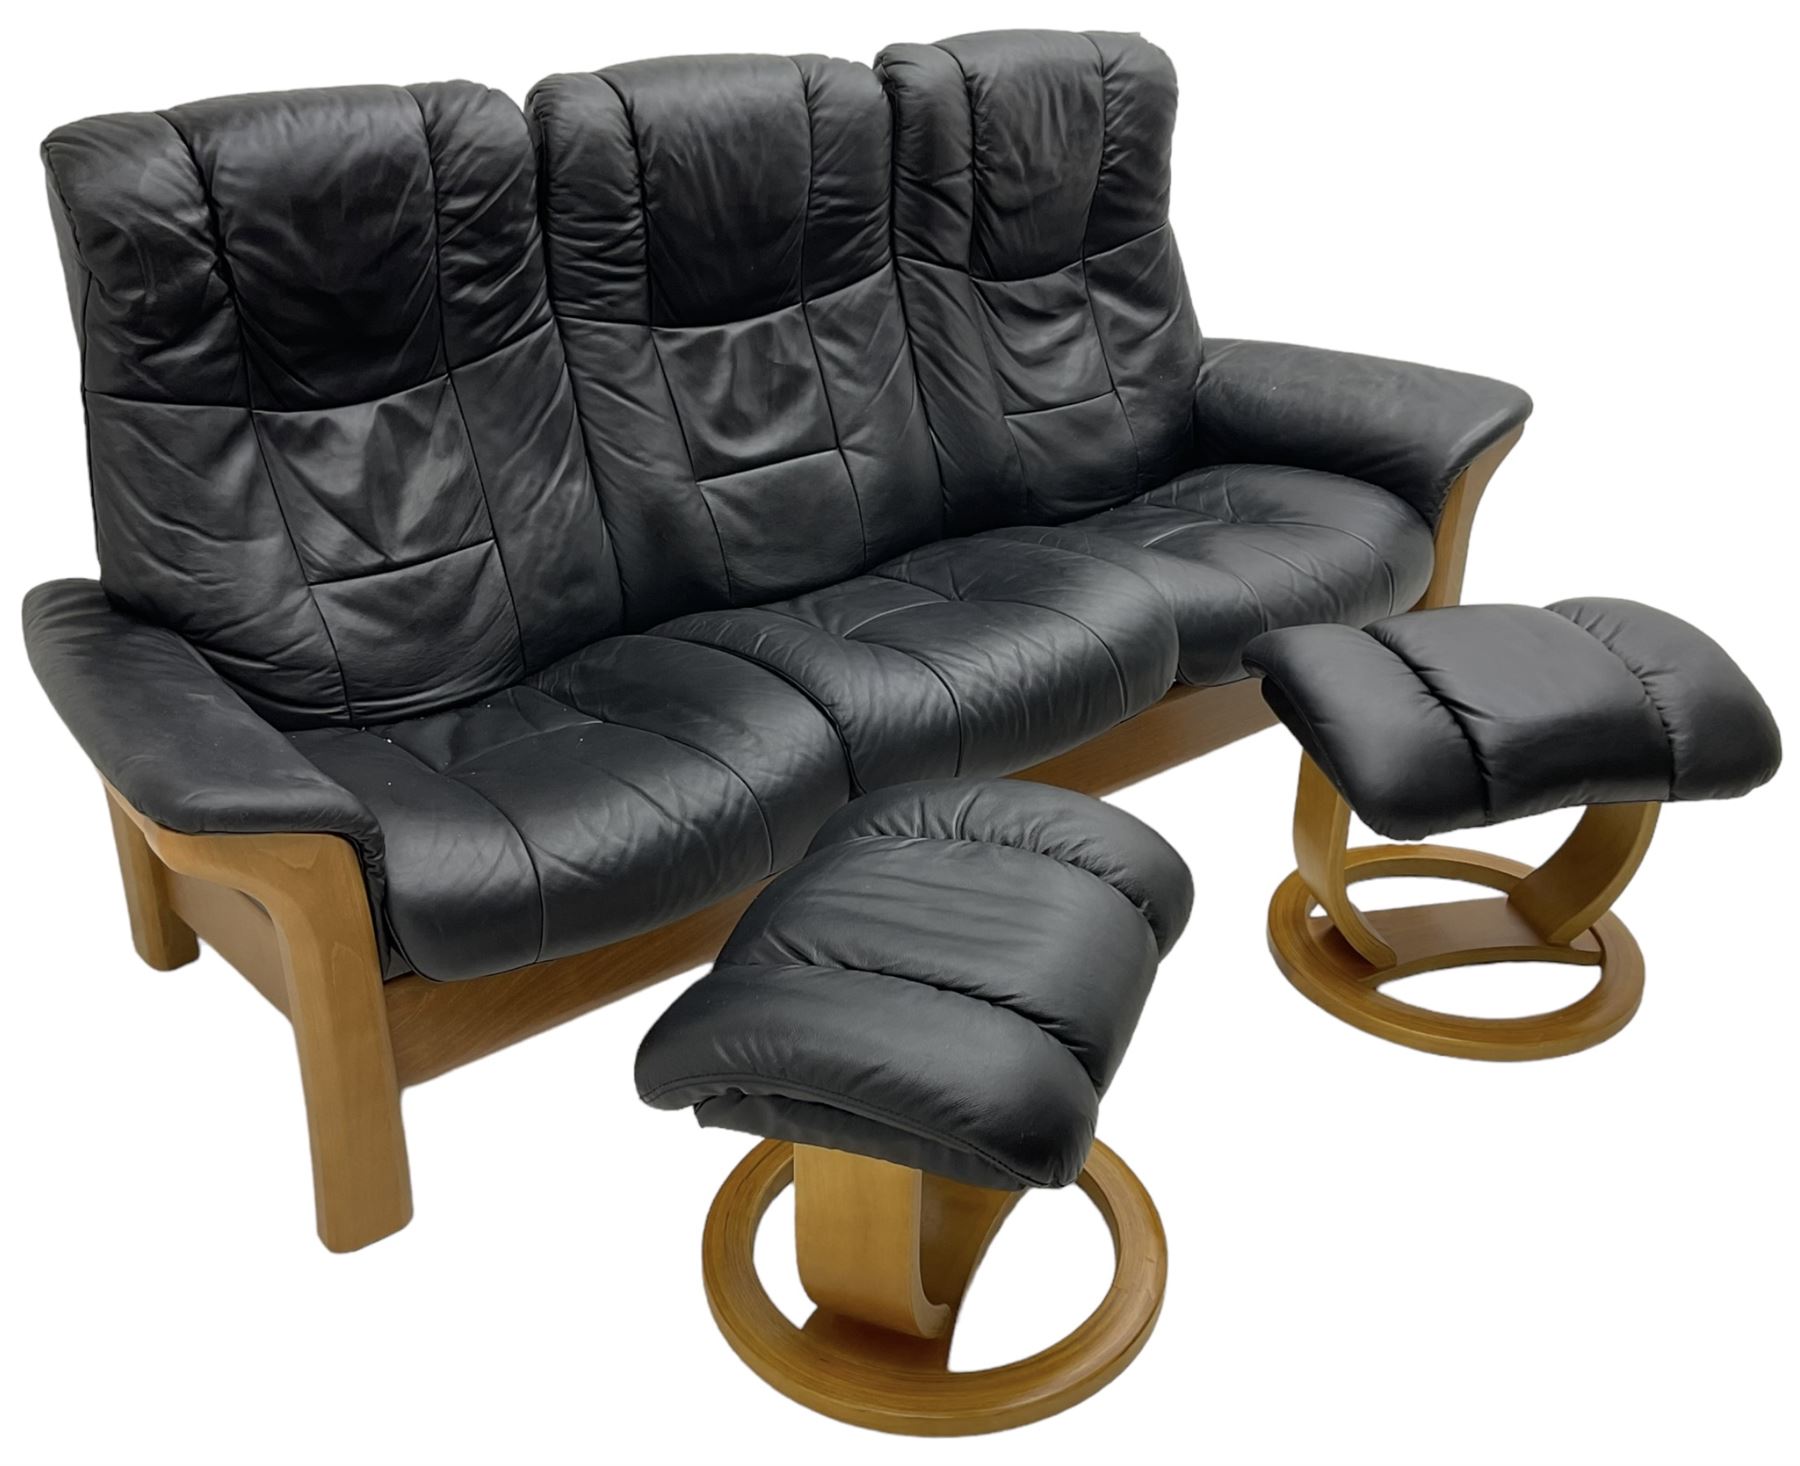 Stressless - 'Buckingham' three-seat settee upholstered in black leather; together with two associat - Image 6 of 6